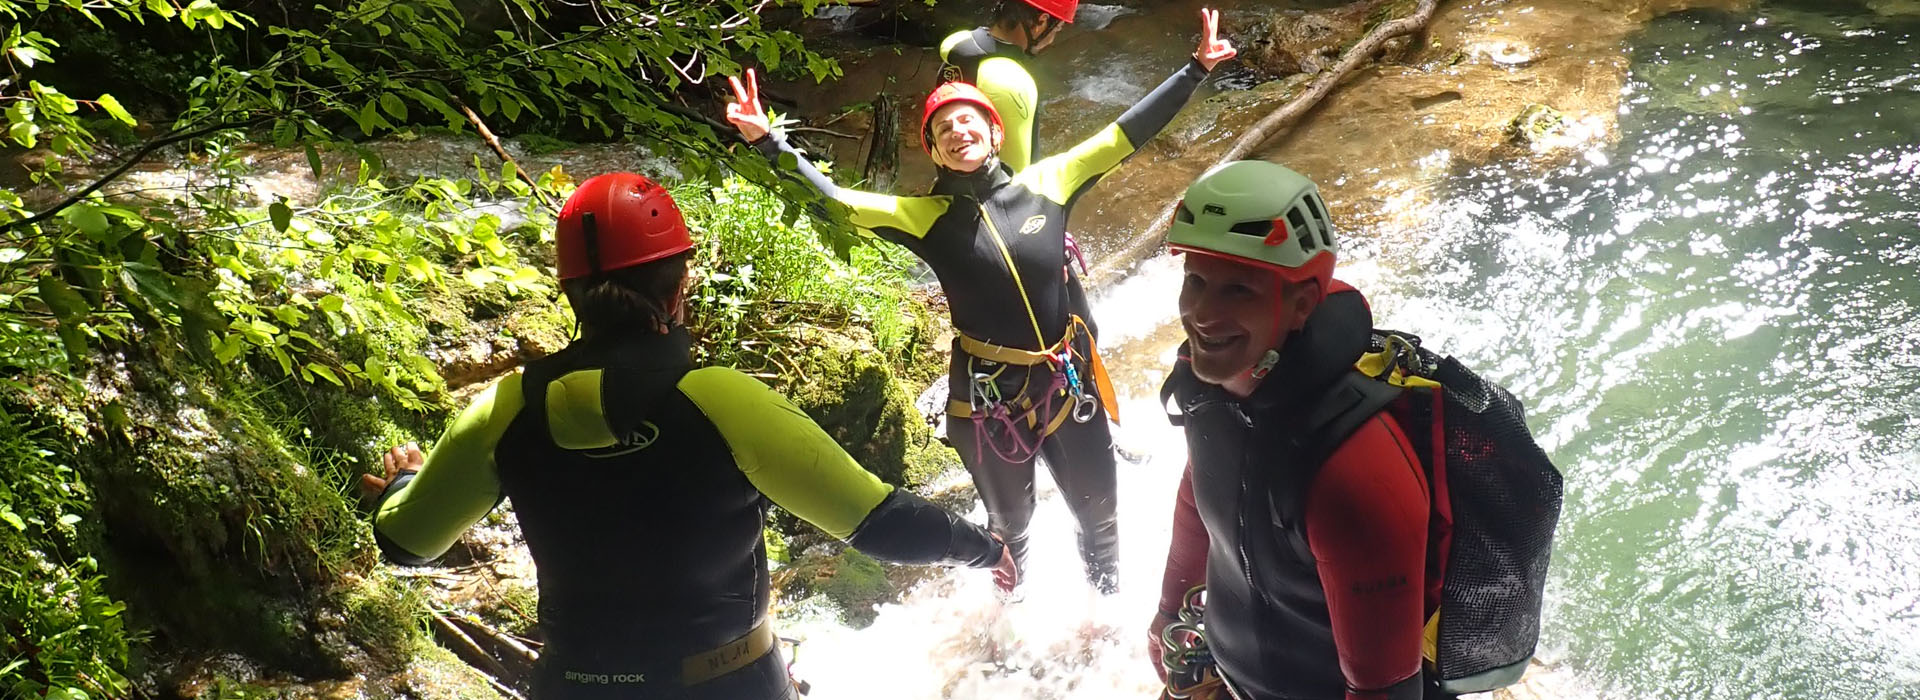 Photo stage de canyoning Vertic'Eau